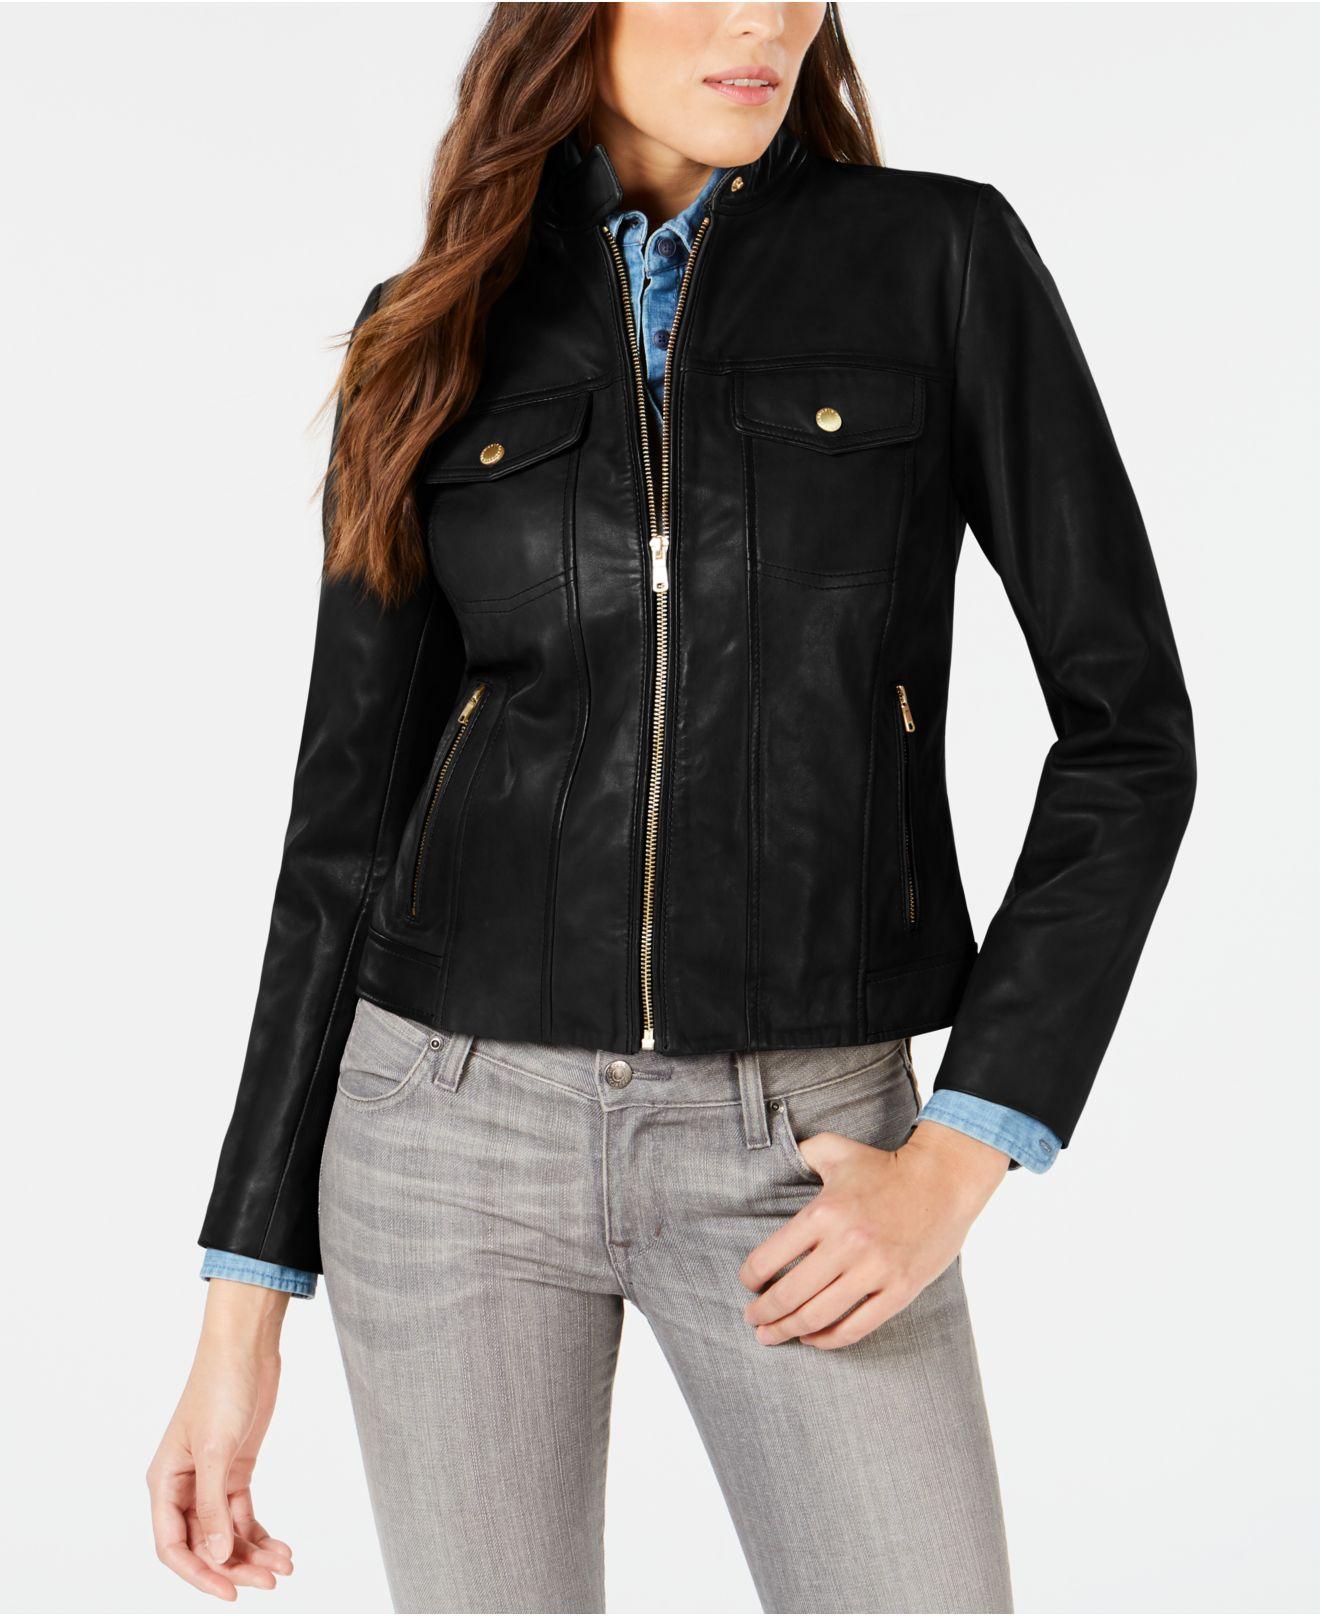 Lyst - Cole Haan Seamed Leather Jacket in Black